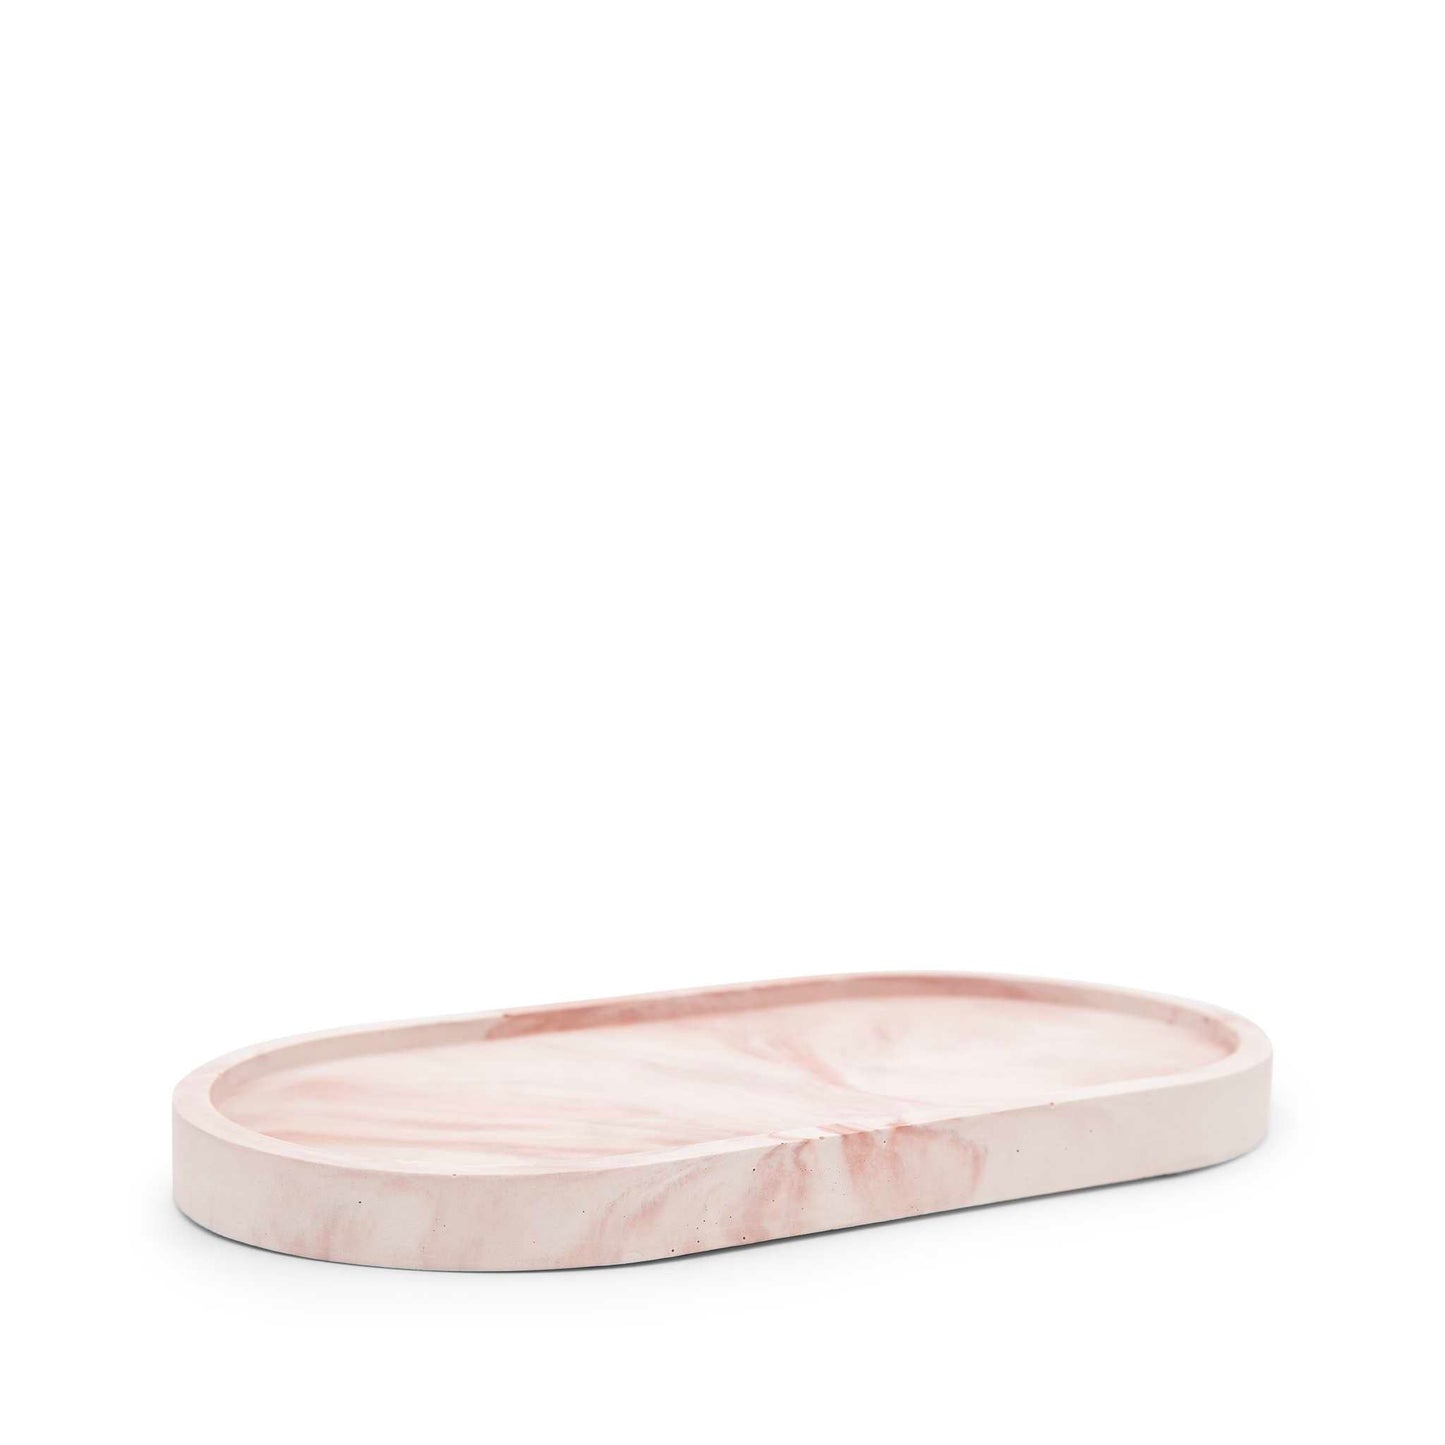 Faerly Homewares Concrete Oval Decorative Tray  - Marbled Pink